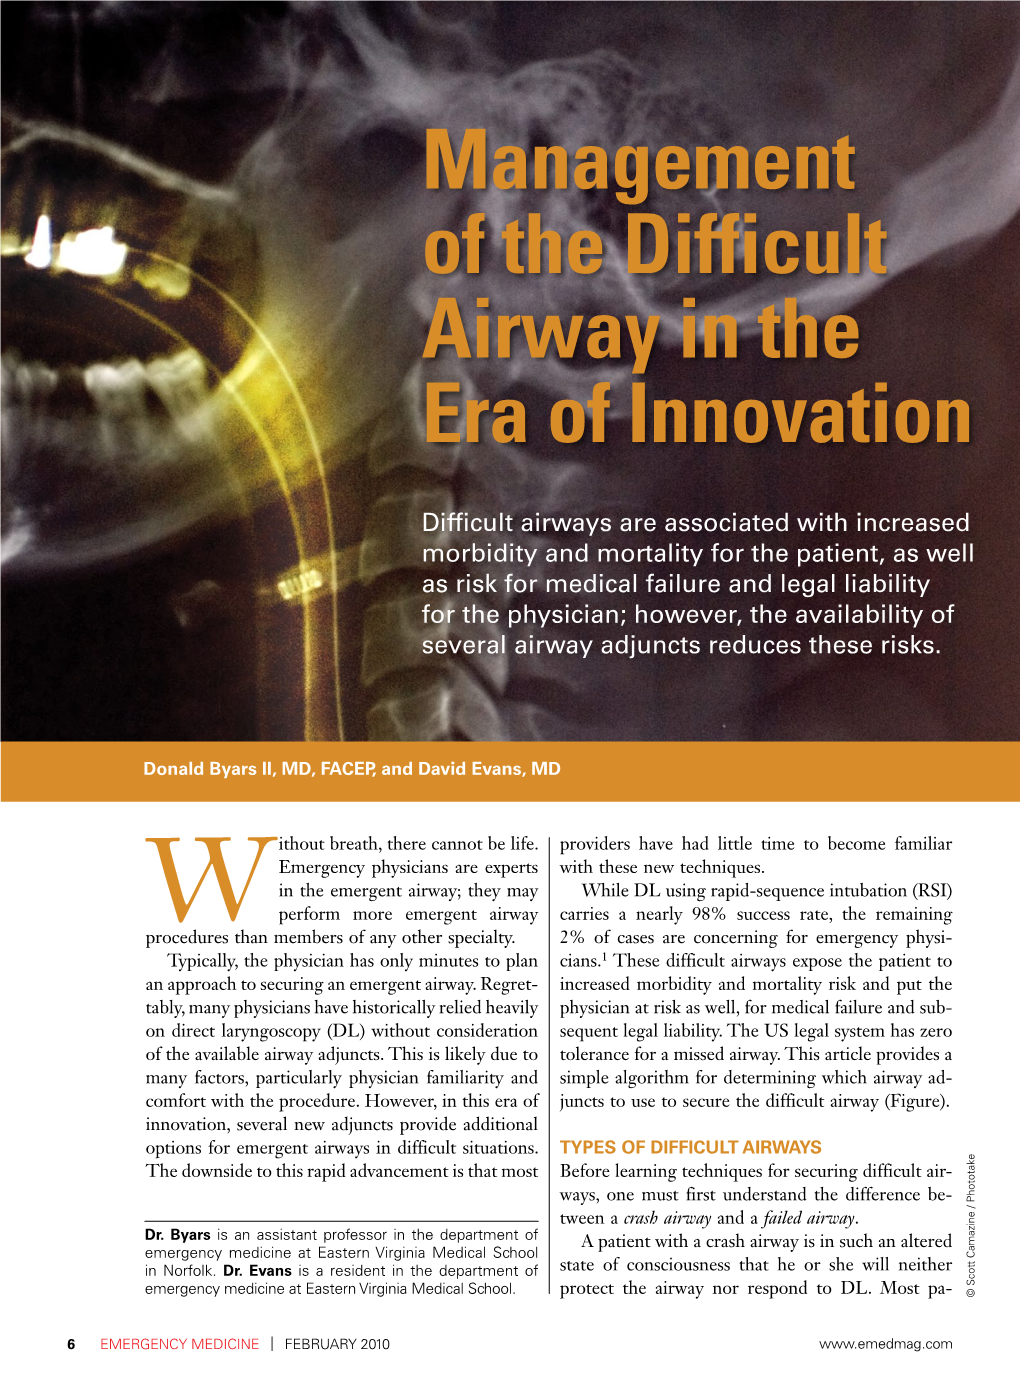 Management of the Difficult Airway in the Era of Innovation